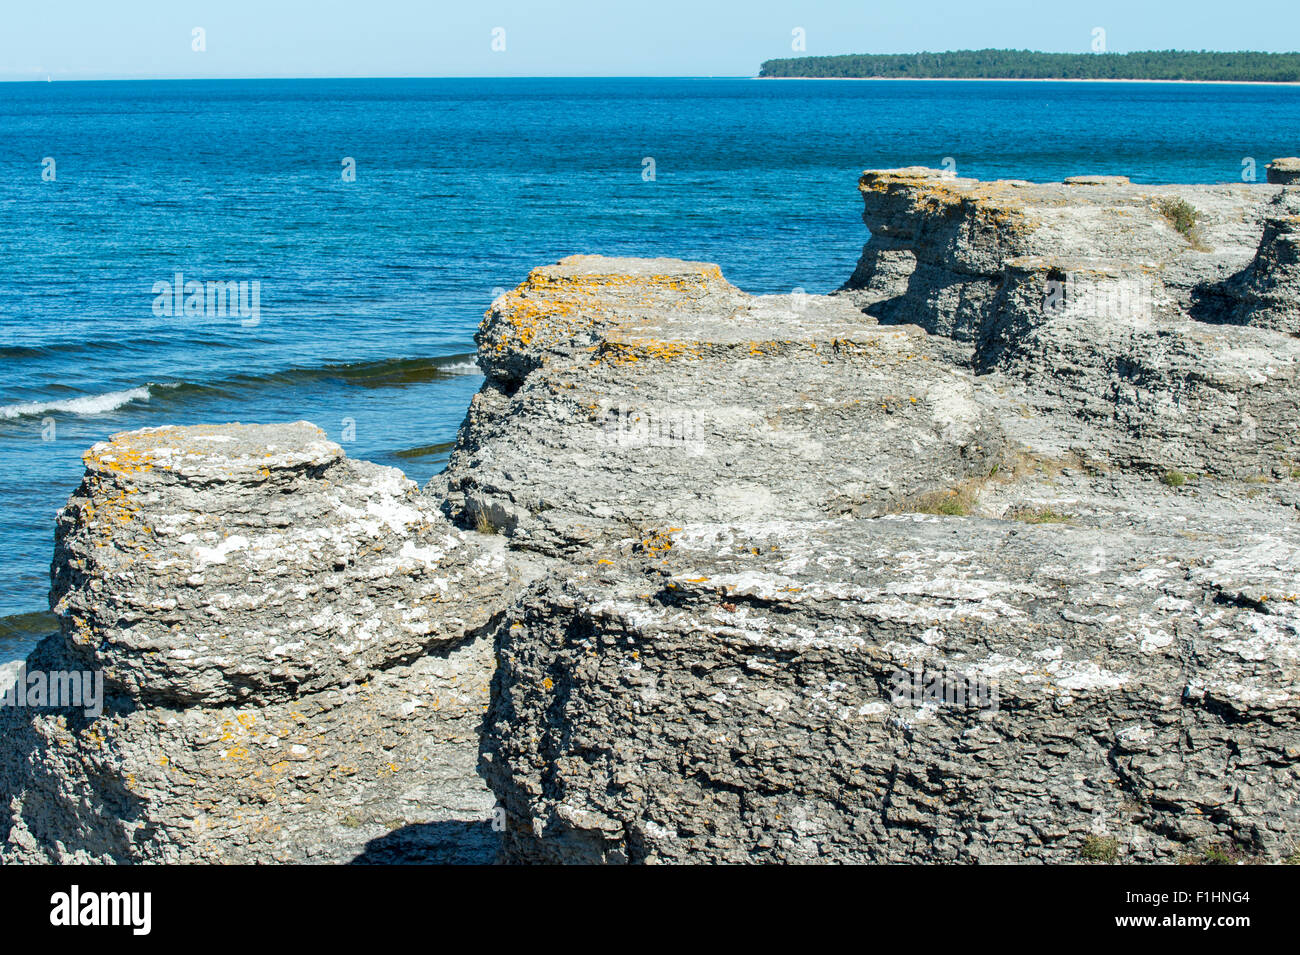 Seastacks at Byrum on northern Oland and the view of the Baltic Sea. Stock Photo